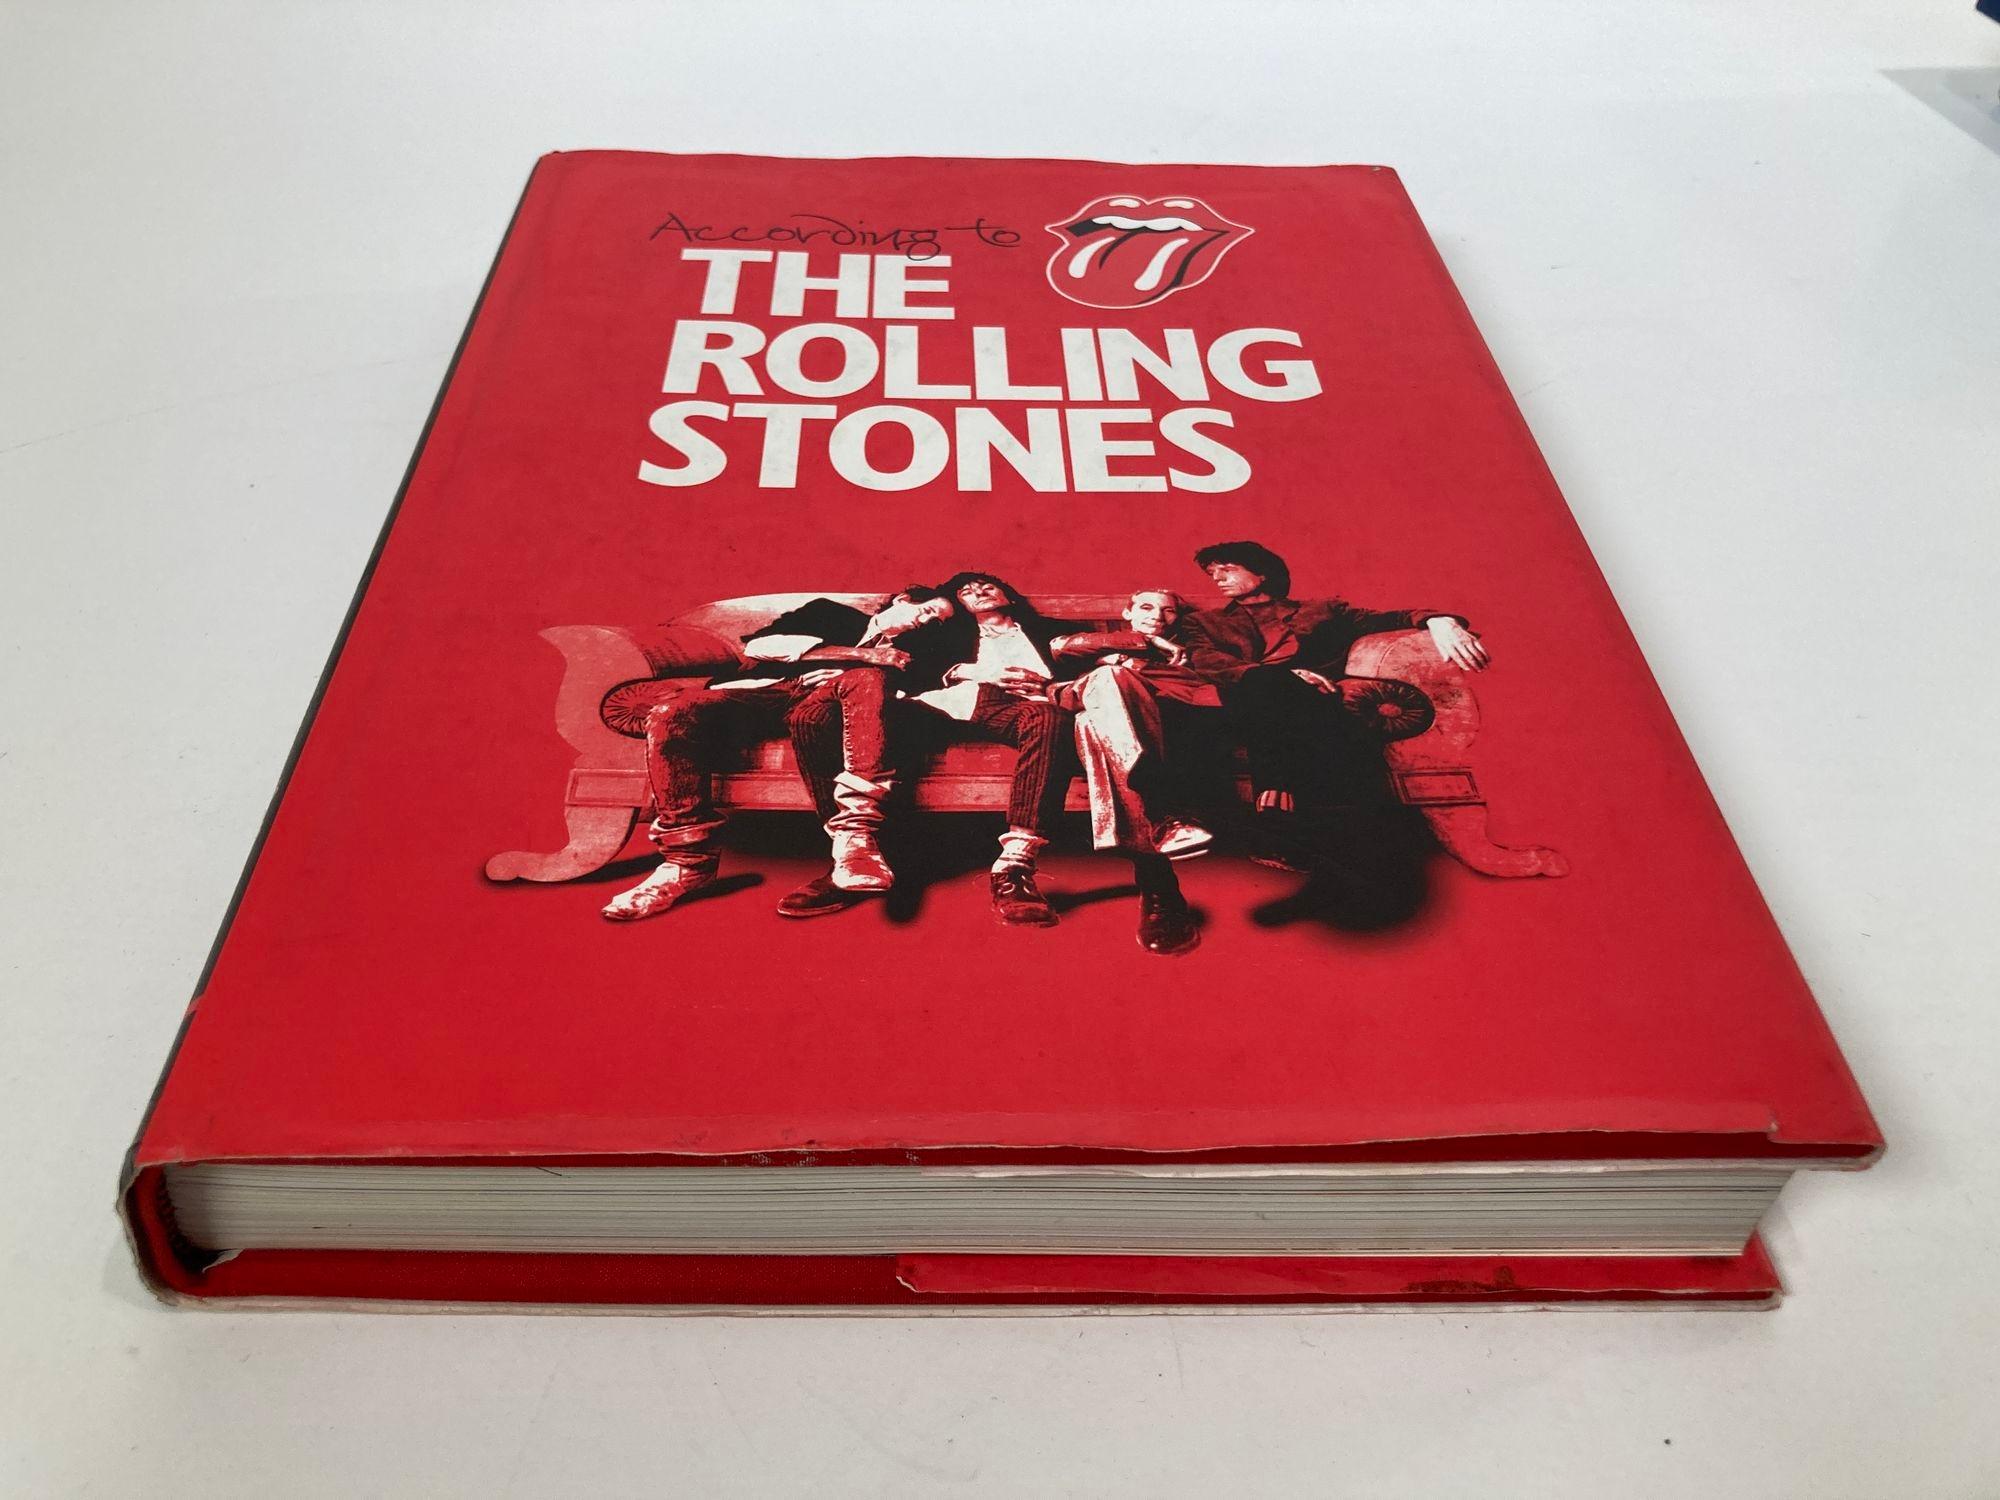 Modern According to The Rolling Stones Hardcover Table Book For Sale